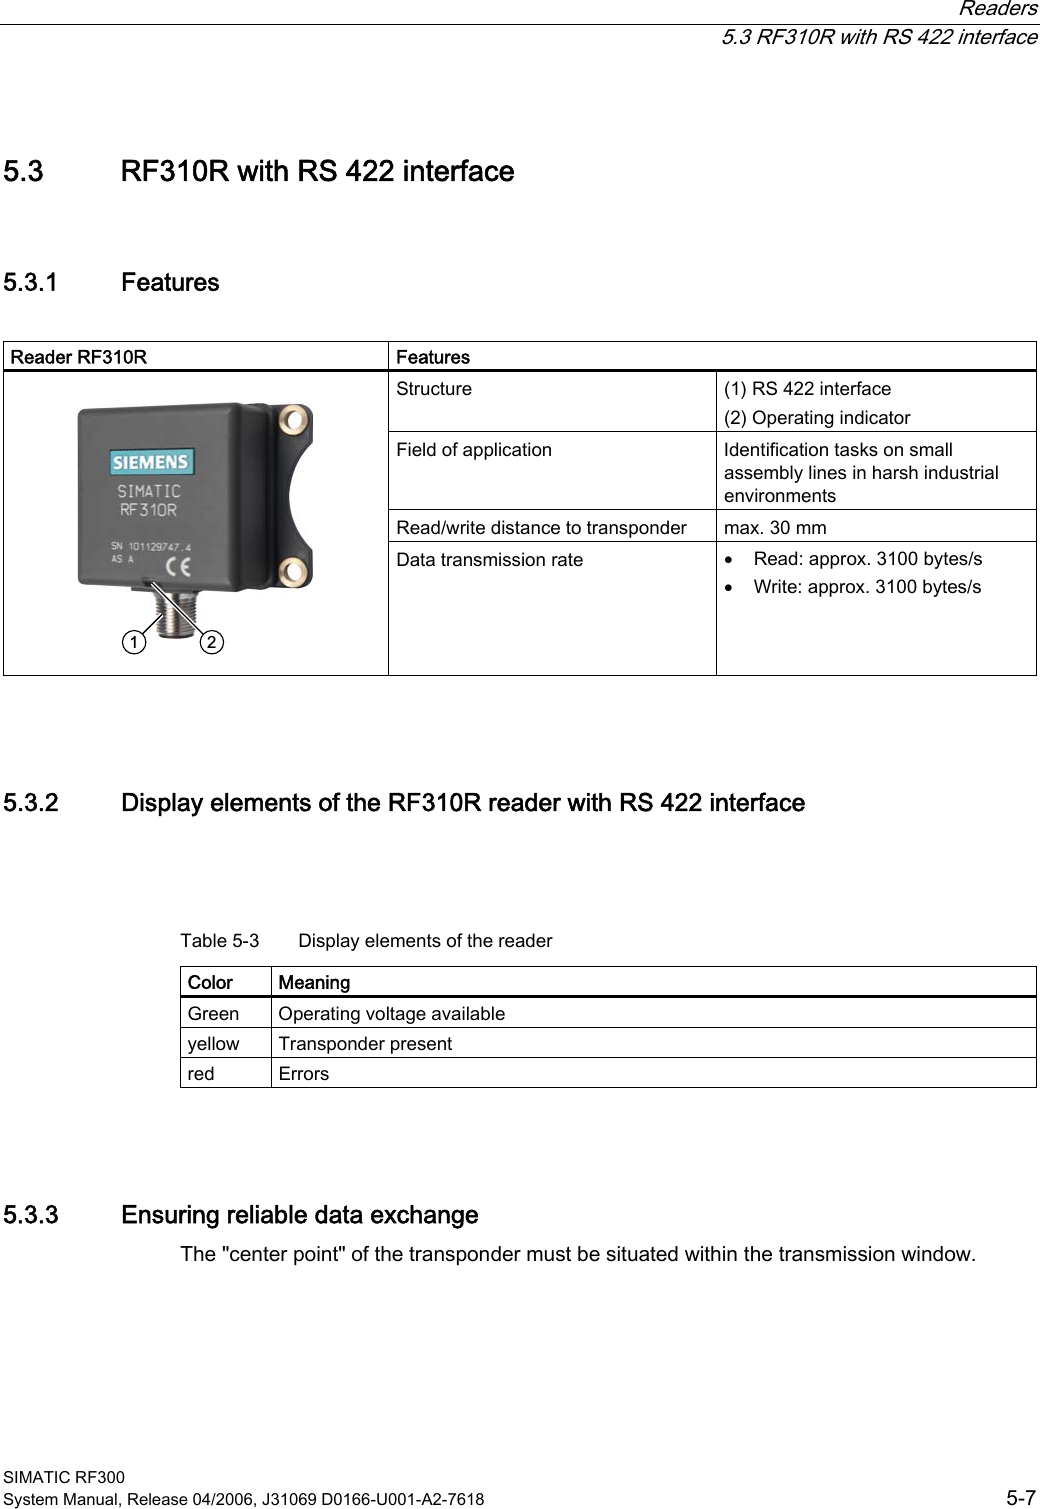  Readers  5.3 RF310R with RS 422 interface SIMATIC RF300 System Manual, Release 04/2006, J31069 D0166-U001-A2-7618  5-7 5.3 5.3 RF310R with RS 422 interface 5.3.1  Features  Reader RF310R  Features Structure  (1) RS 422 interface (2) Operating indicator Field of application  Identification tasks on small assembly lines in harsh industrial environments Read/write distance to transponder  max. 30 mm     Data transmission rate  • Read: approx. 3100 bytes/s • Write: approx. 3100 bytes/s  5.3.2  Display elements of the RF310R reader with RS 422 interface  Table 5-3  Display elements of the reader Color  Meaning Green  Operating voltage available yellow  Transponder present red  Errors  5.3.3  Ensuring reliable data exchange The &quot;center point&quot; of the transponder must be situated within the transmission window. 